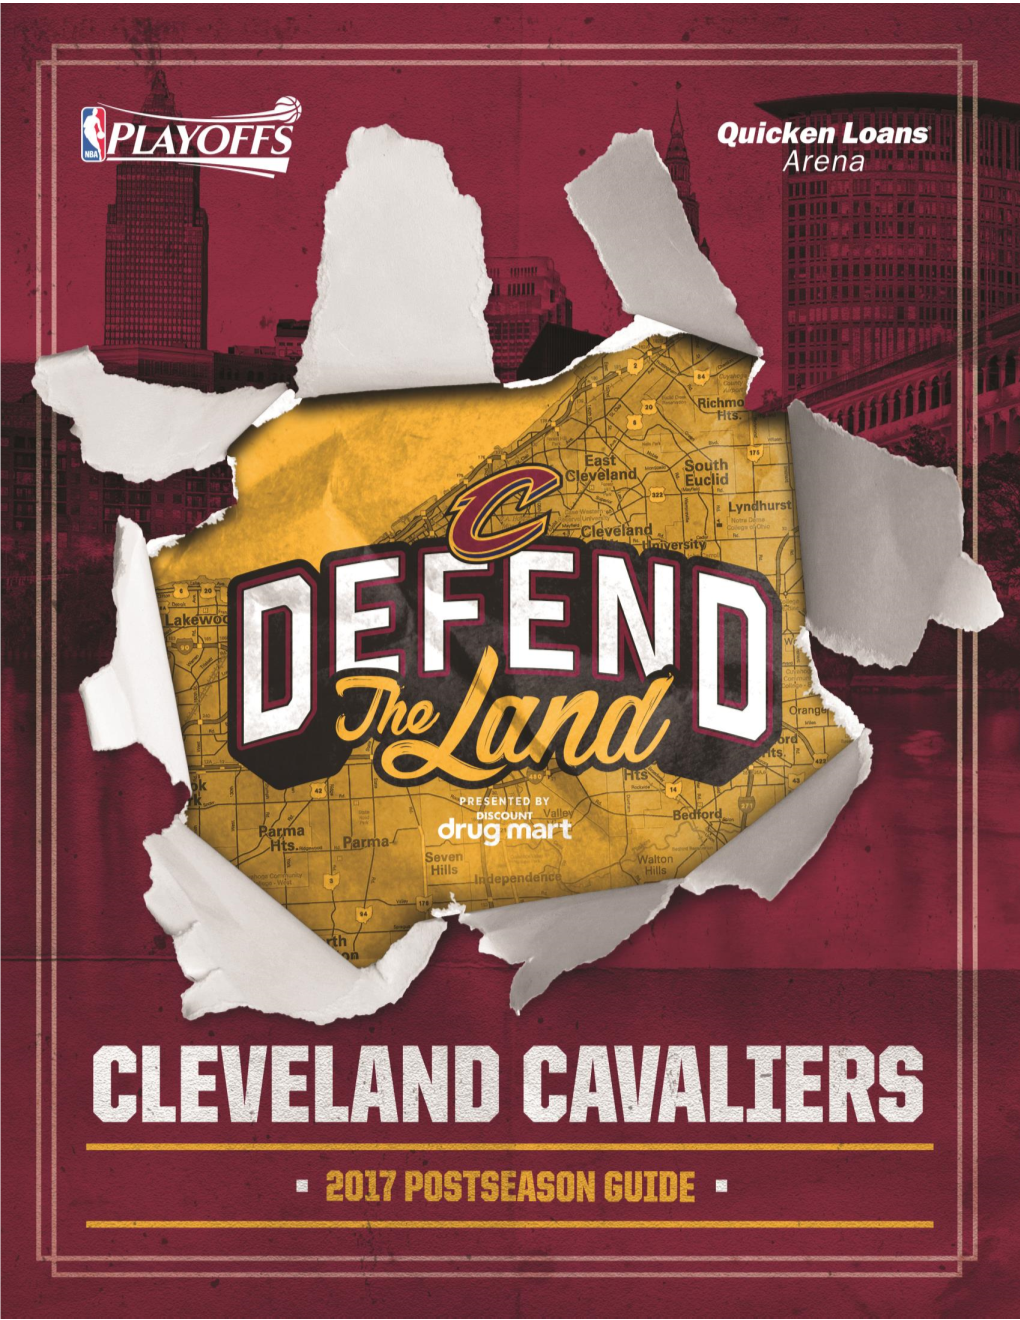 Cleveland Cavaliers: Champions on the Court and in the Community